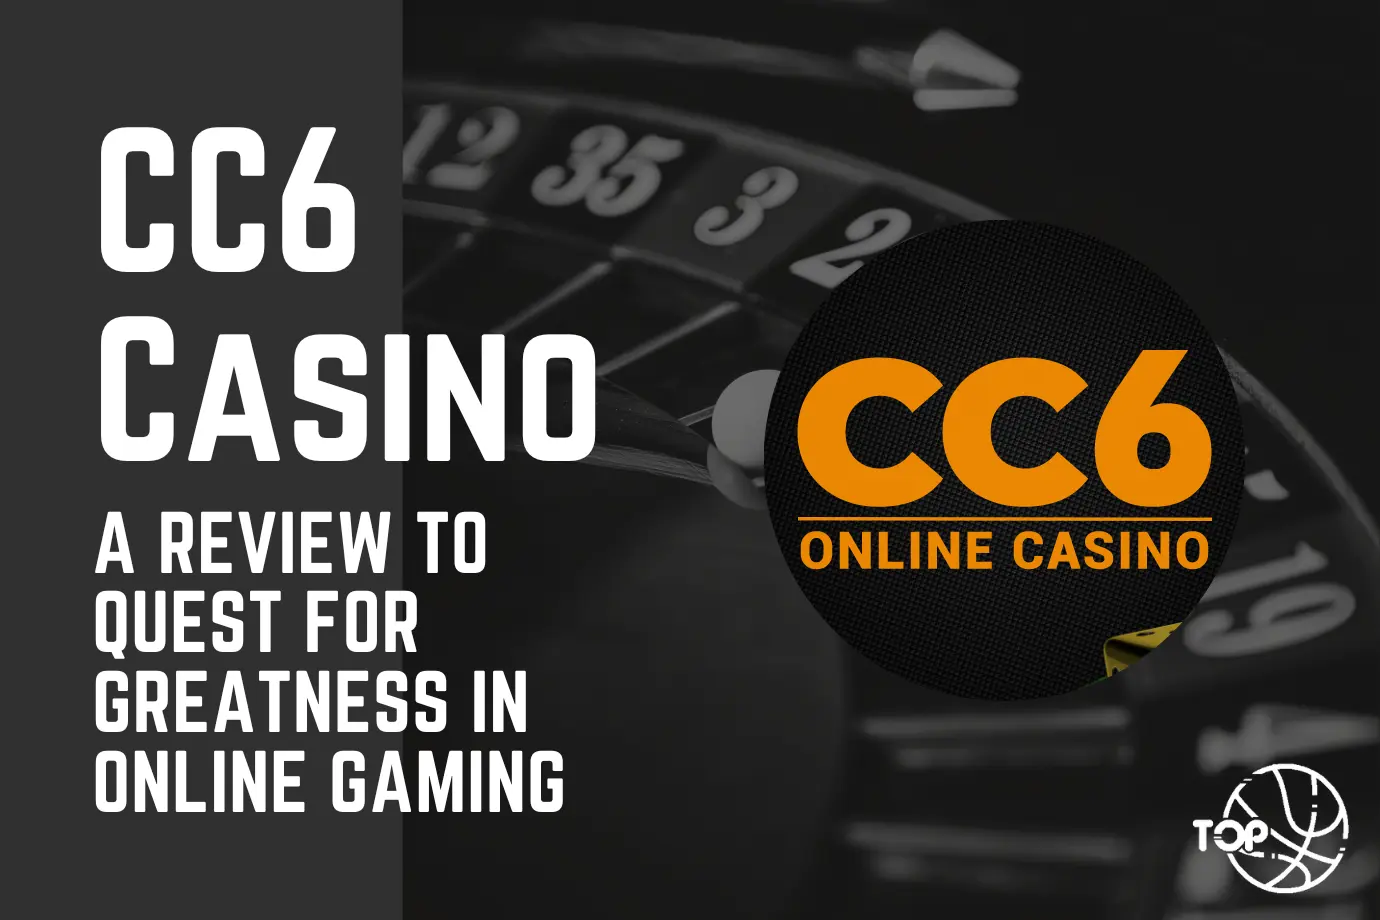 CC6 Casino: A Review to Quest for Greatness in Online Gaming